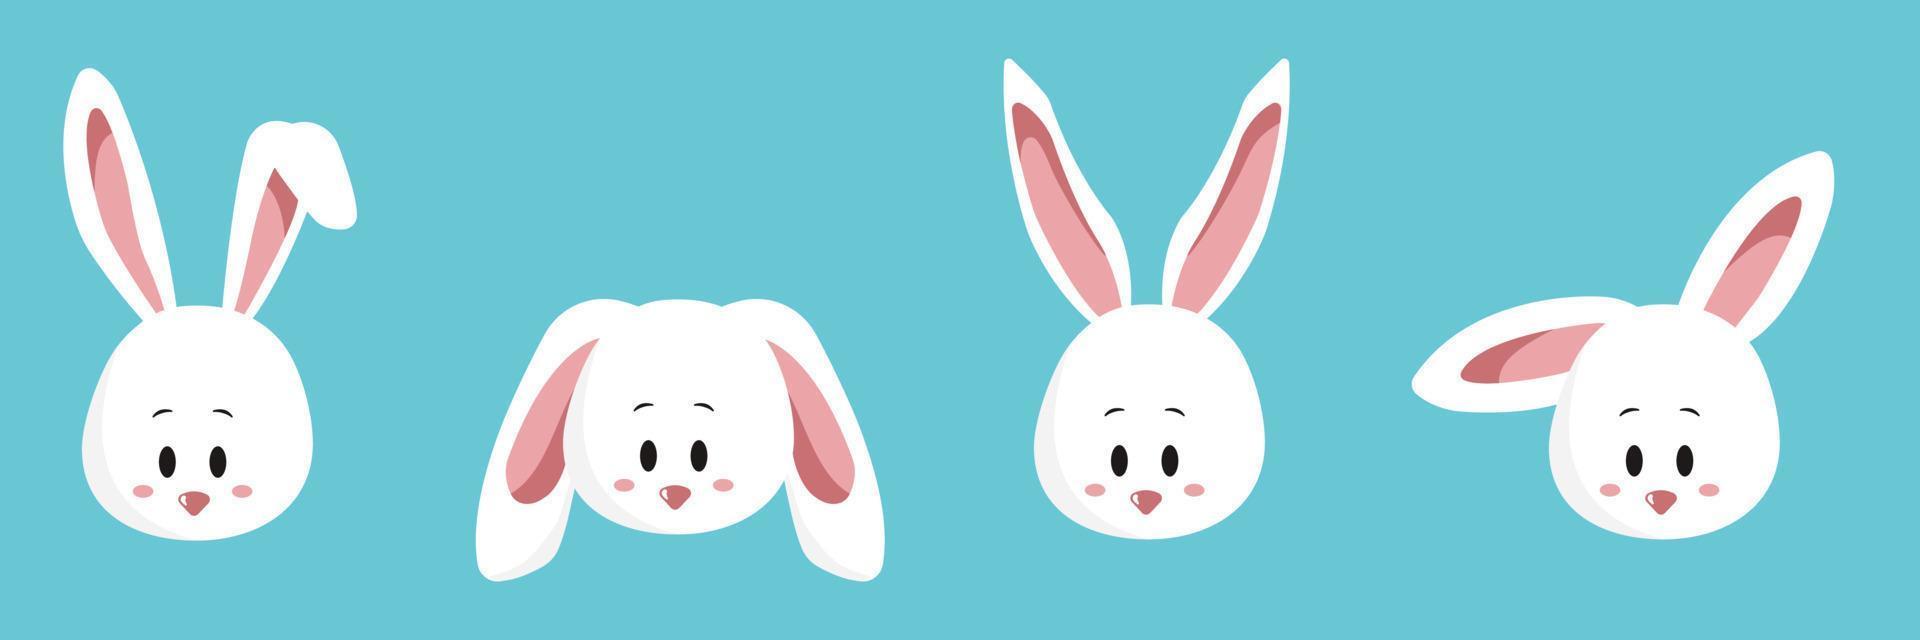 face set of a cute white rabbit. Kawaii bunny ear emoji, or bunny emoticon. symbol of a rabbit. Expression of a funny animal cartoon figure. outline in a vector illustration